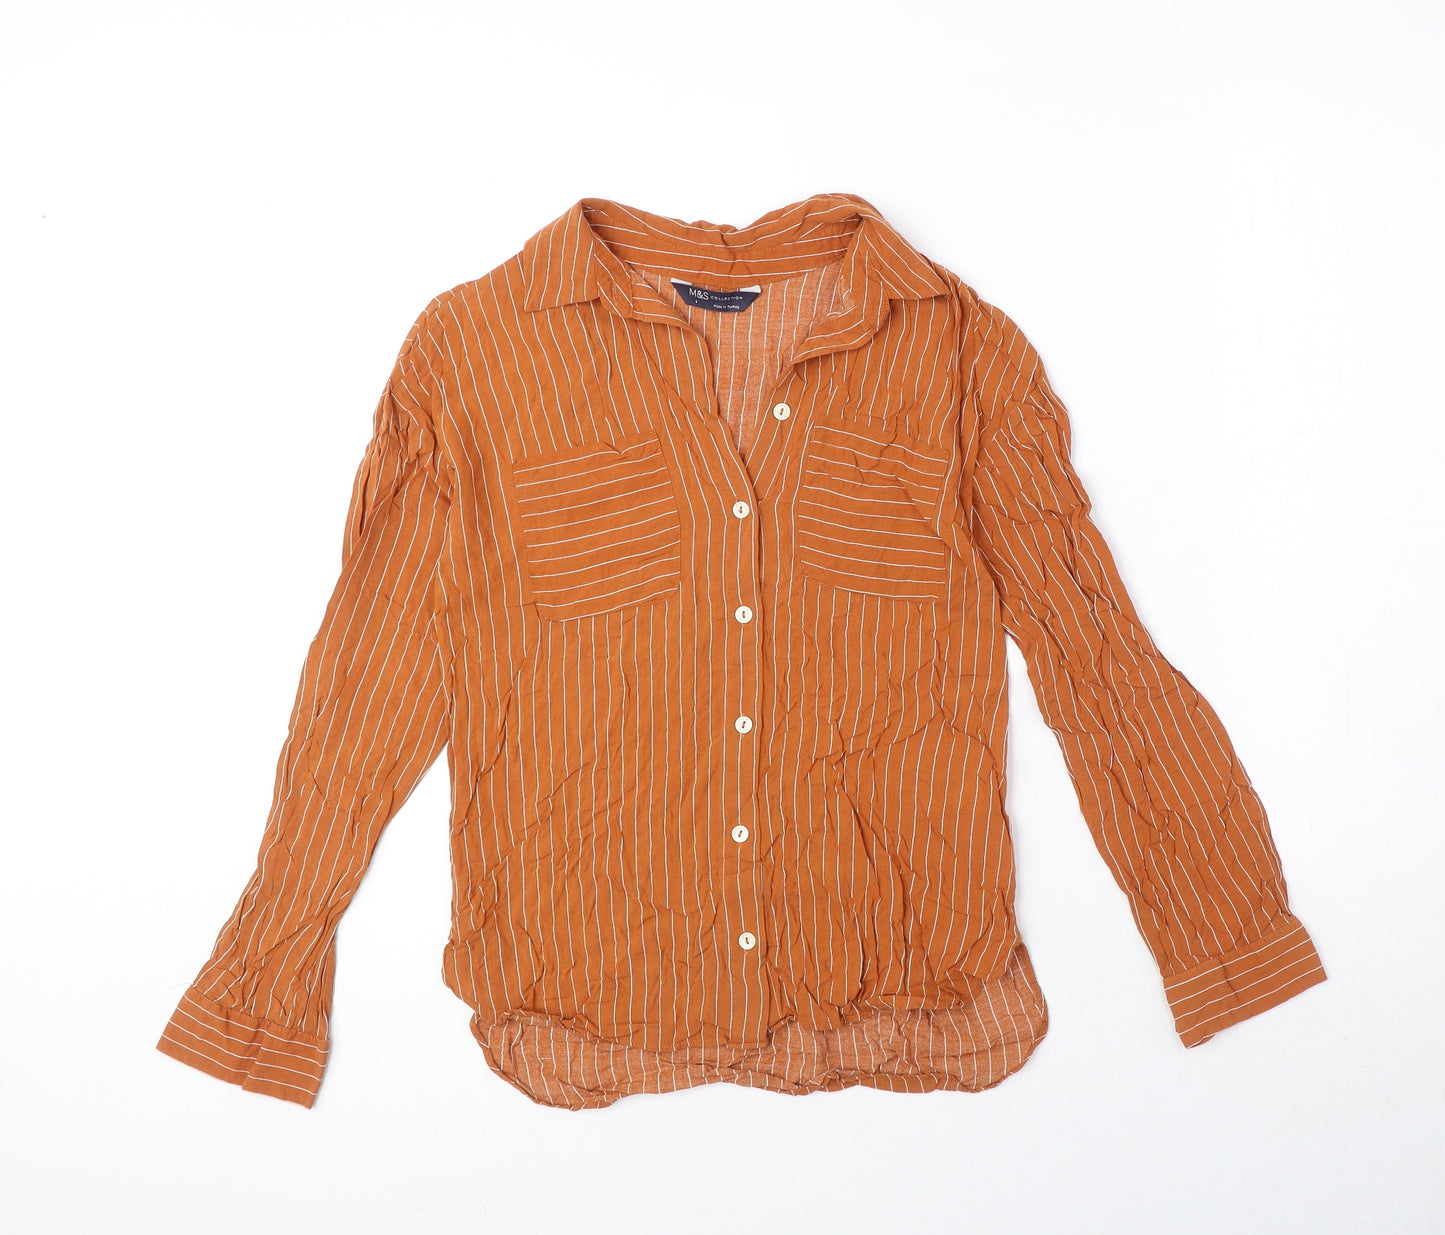 Marks and Spencer Womens Orange Striped Viscose Basic Button-Up Size 6 Collared